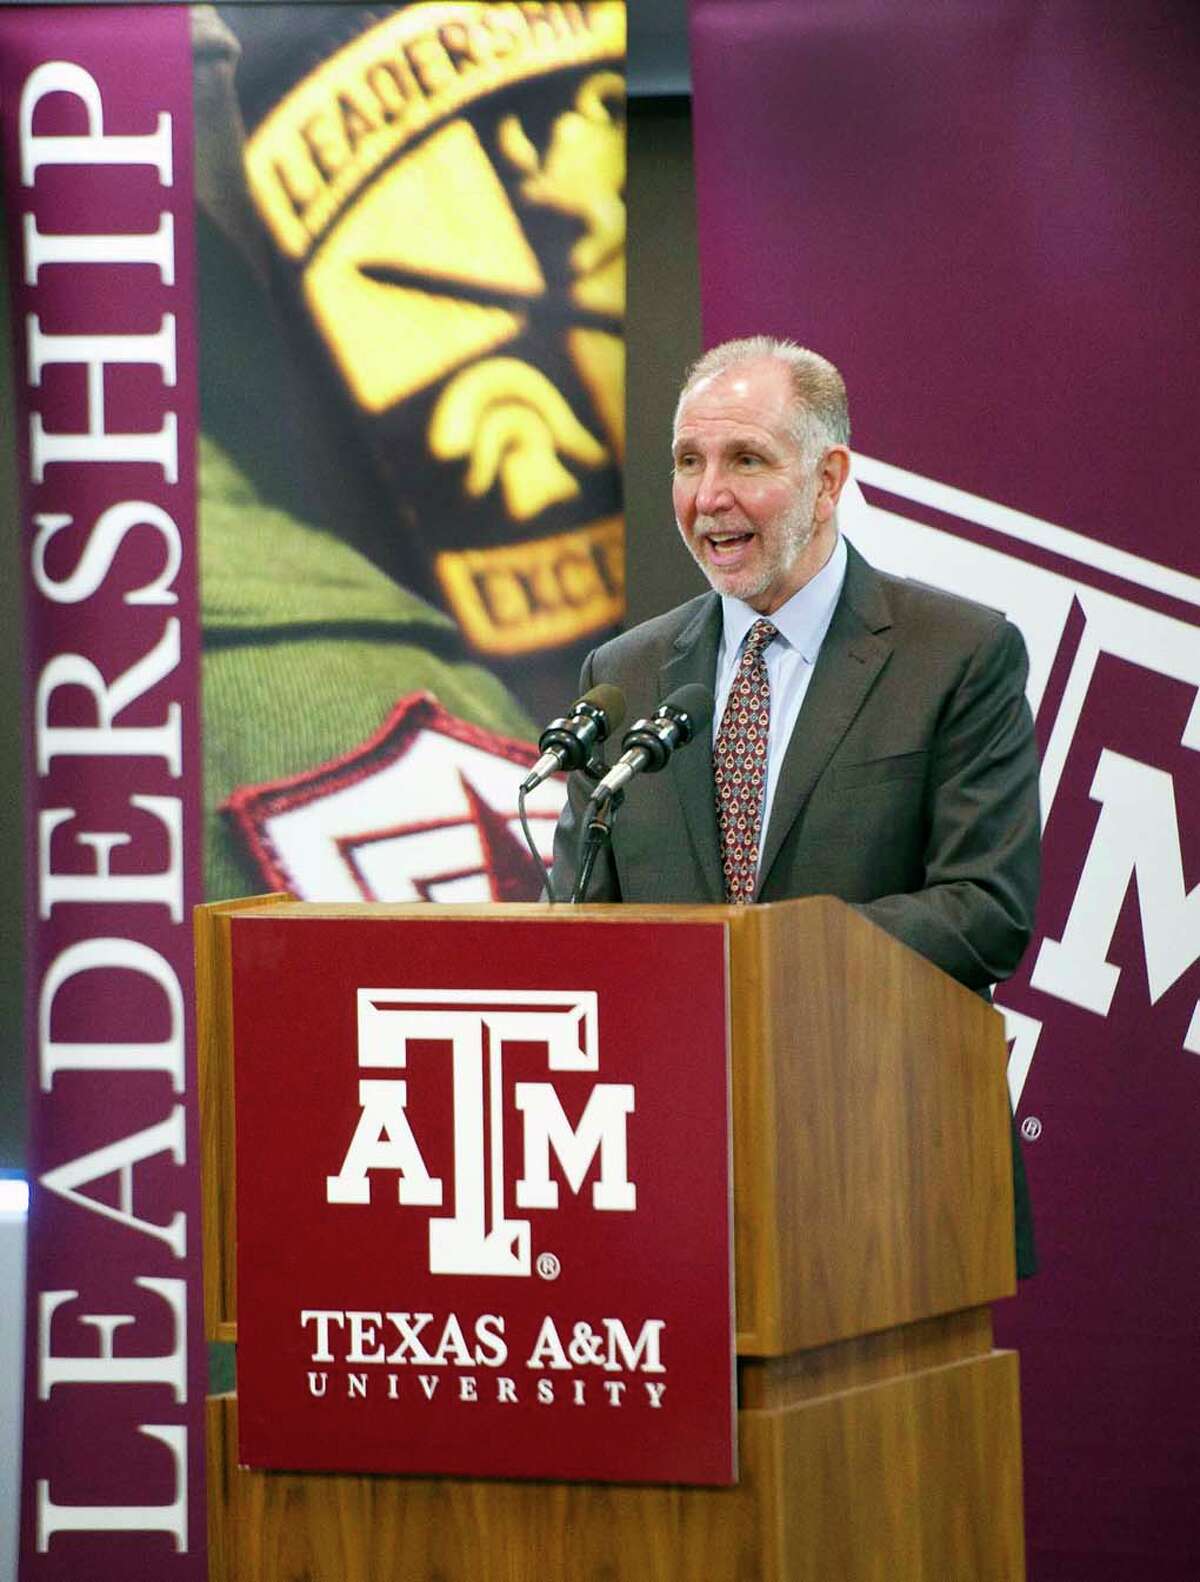 Texas A&M University President Michael Young﻿ told the Chronicle editorial board: "We're in the midst of thinking through this strategic plan of how do we best serve the state. Stay tuned."